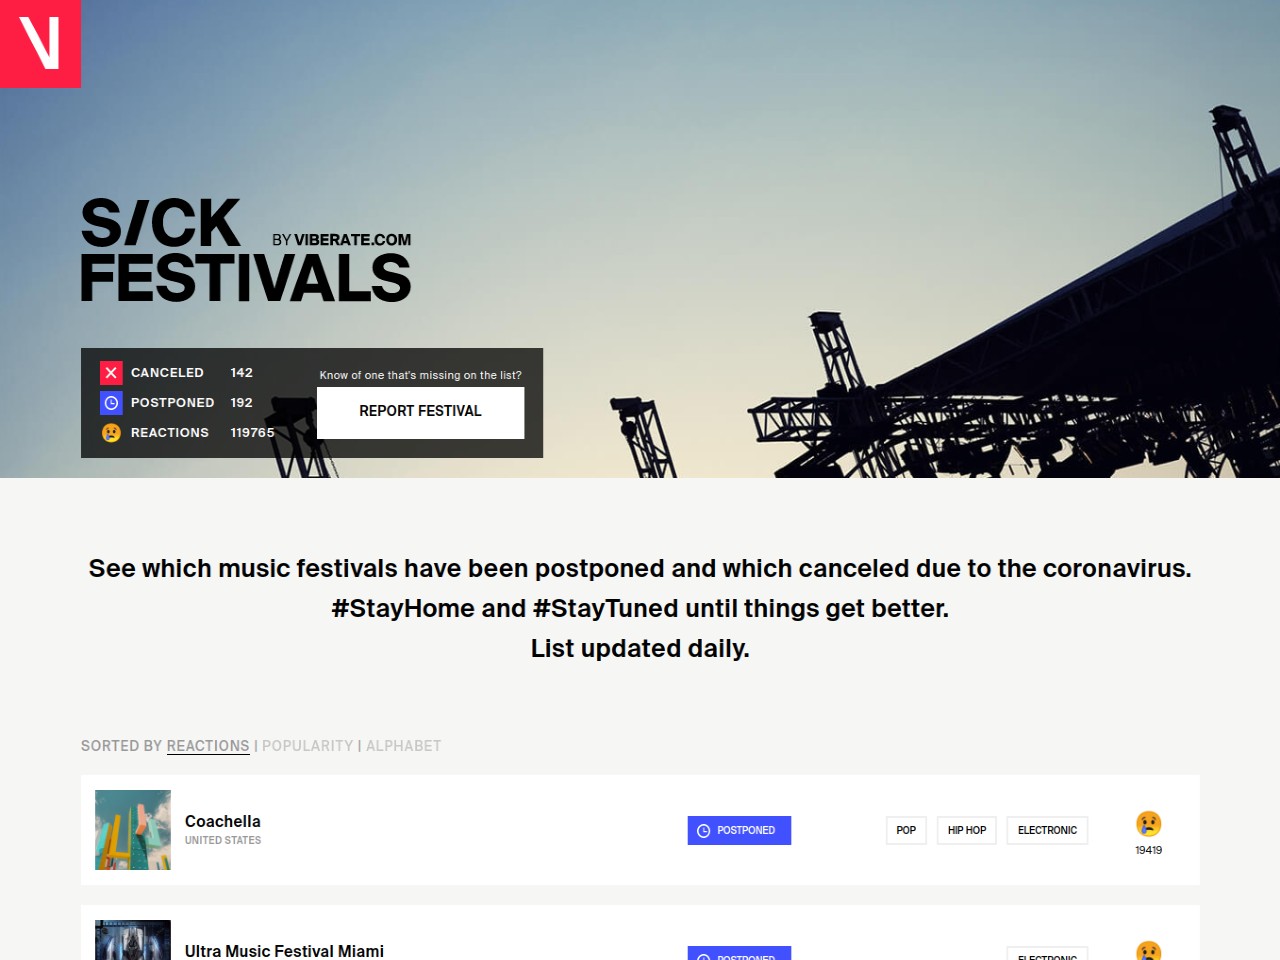 List of canceled and postponed festivals updated daily